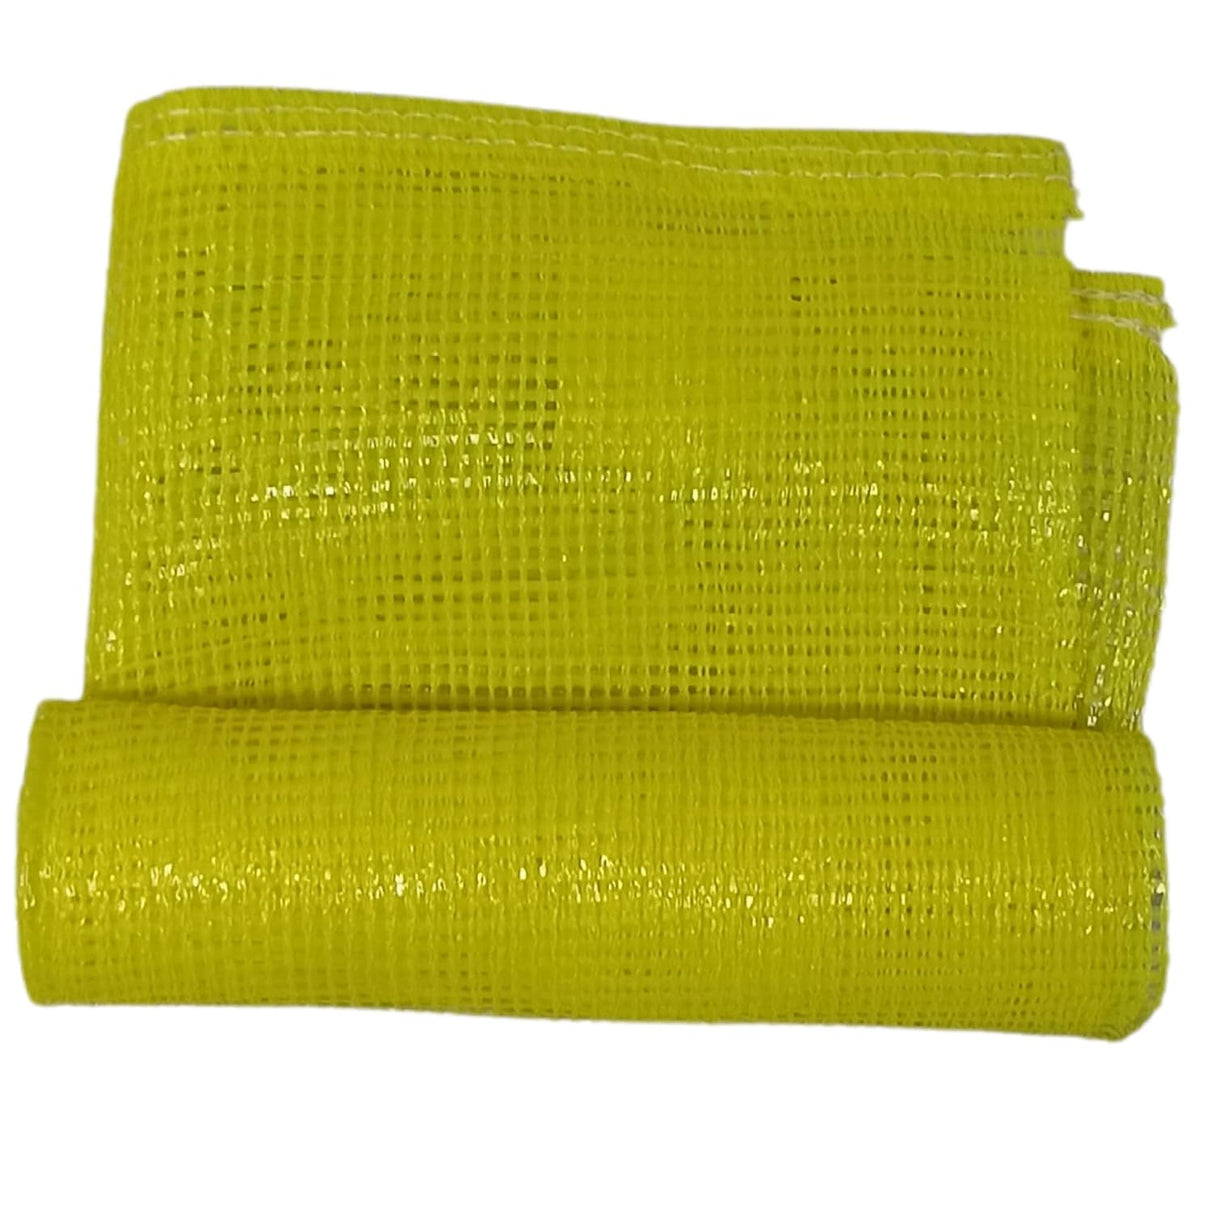 SINGHAL PP Mesh Storage Bags 22x28 Inch with Drawstring, Yellow Color | Up to 25kg Capacity Great for Packaging Produce, Vegetables and Fruit | Multipurpose Bora, Bori (5)